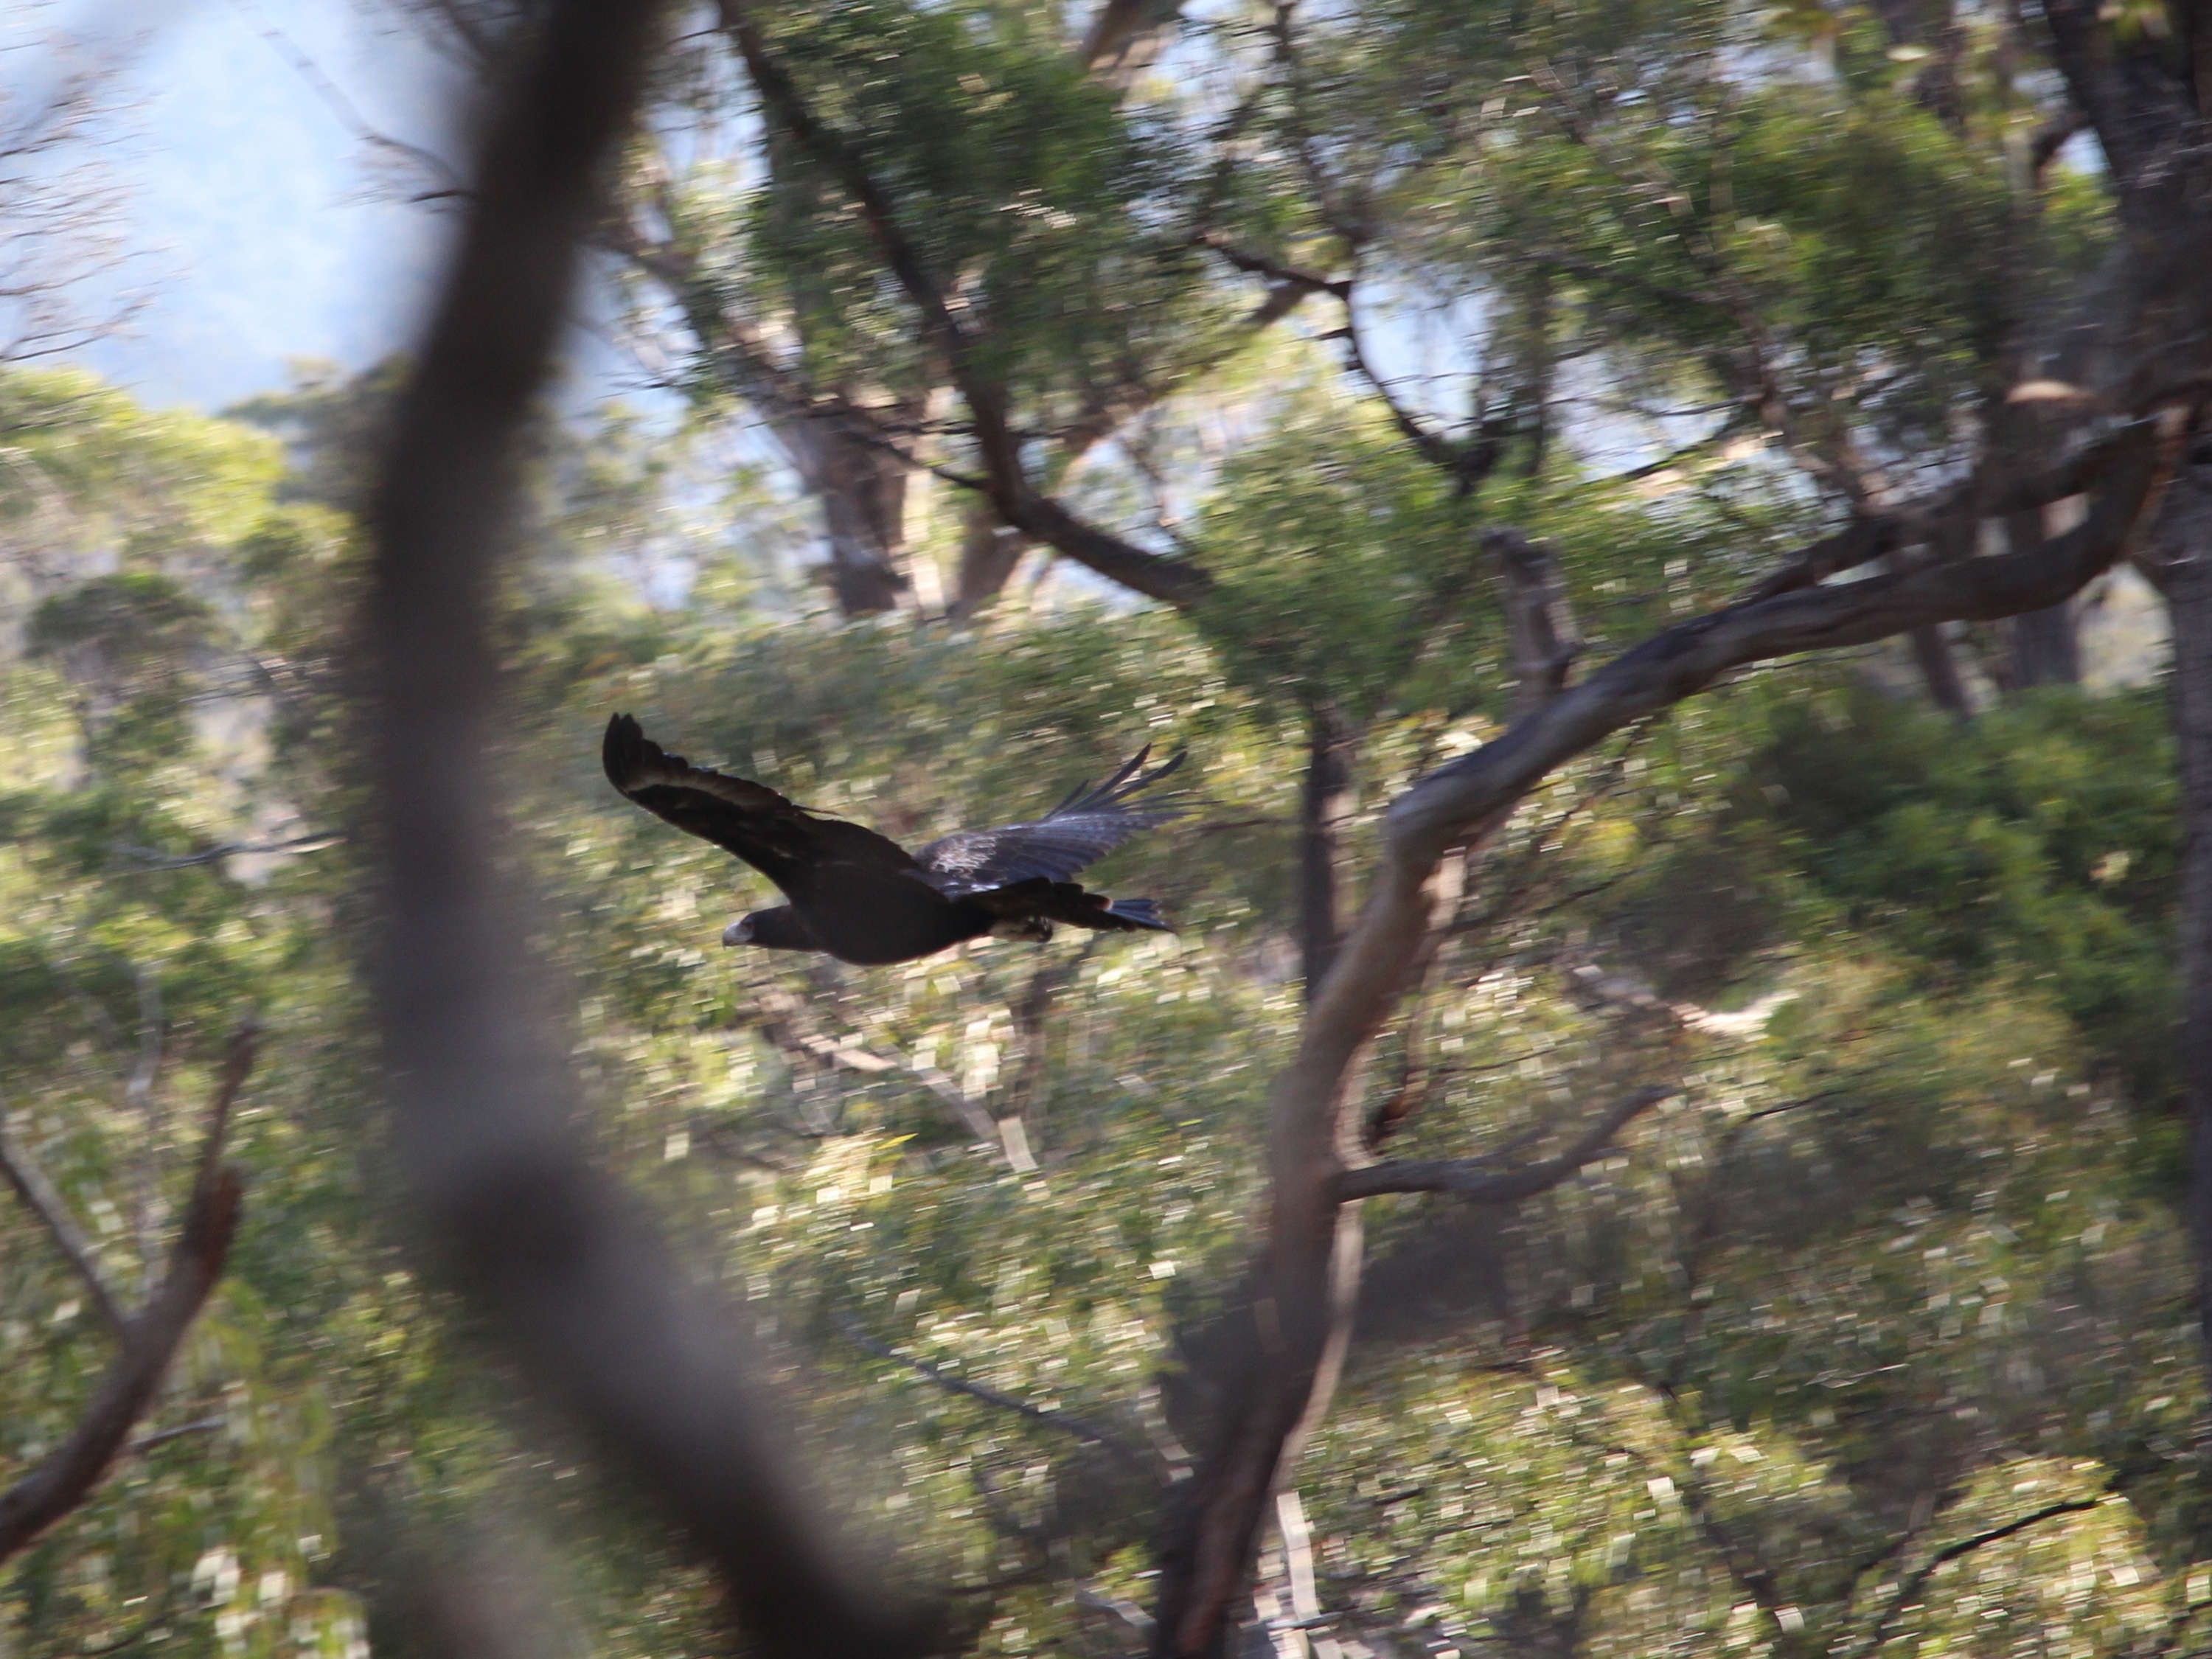 A wedge-tailed eagle flies low through forest trees. We can see the wedge shape of its tail. Photo: Stewart Ralph.